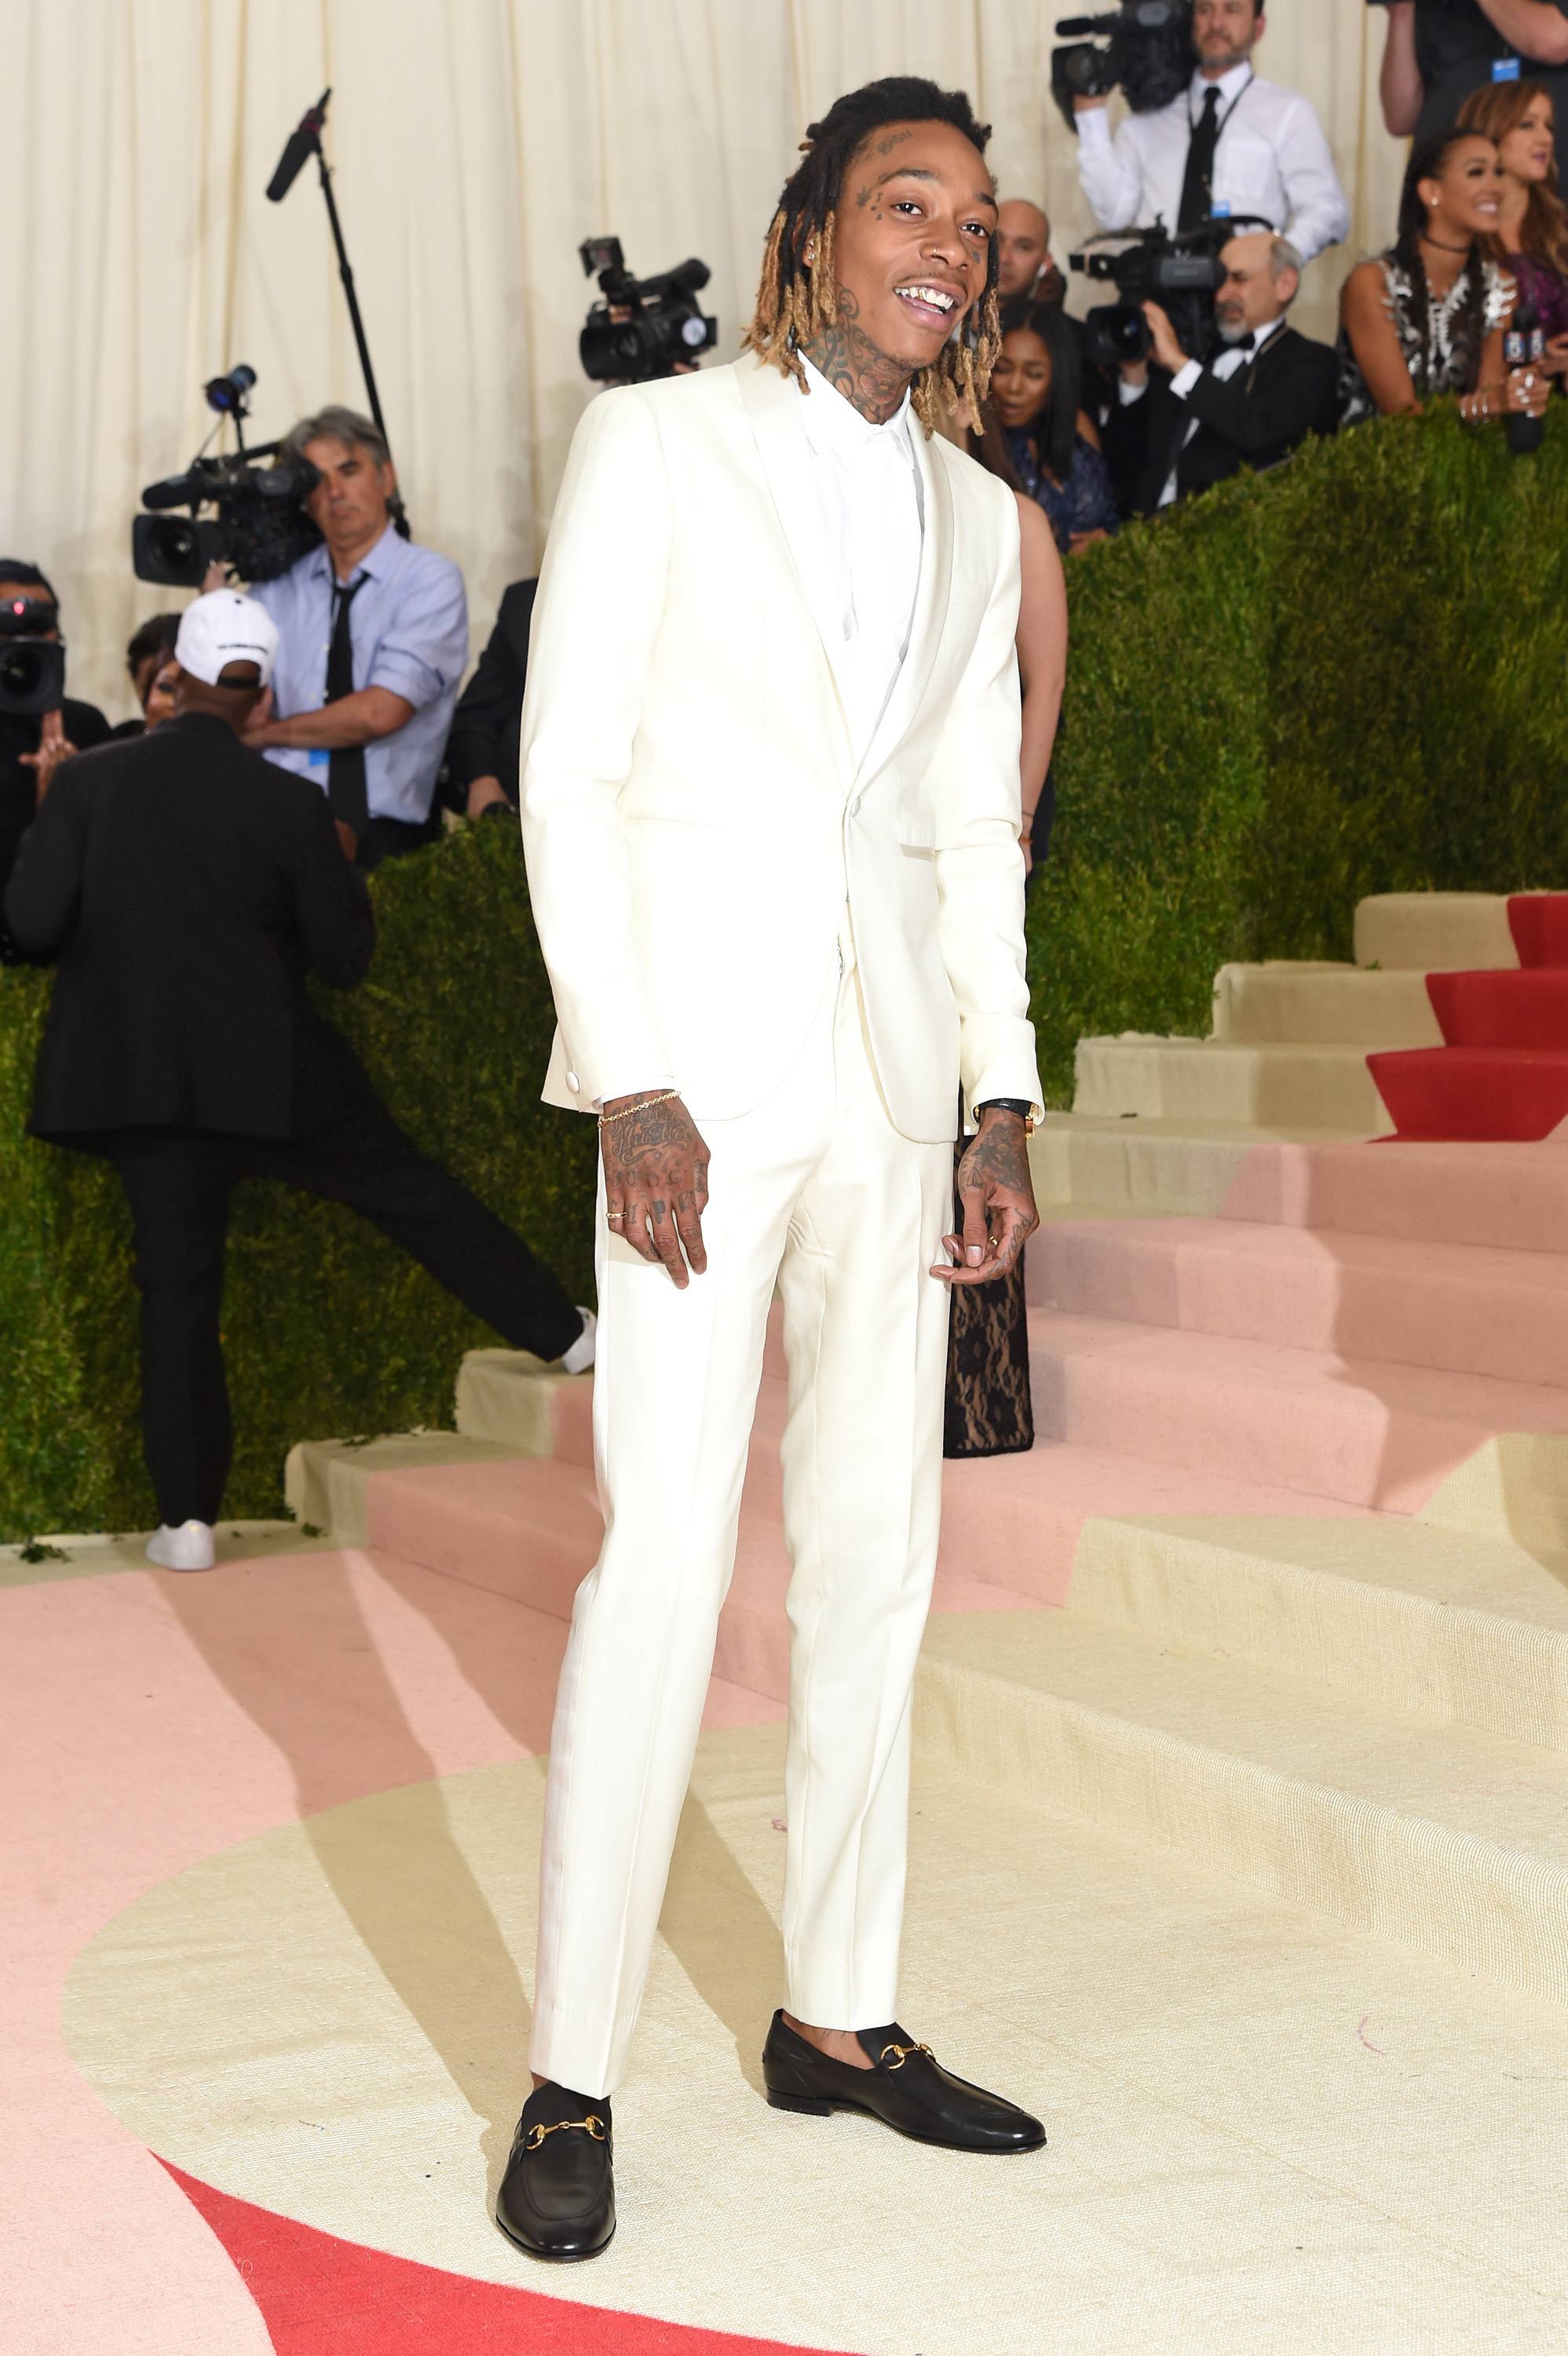 Wiz Khalifa attends  Manus x Machina: Fashion In An Age Of Technology  Costume Institute Gala at Metropolitan Museum of Art on May 2, 2016 in New York City.